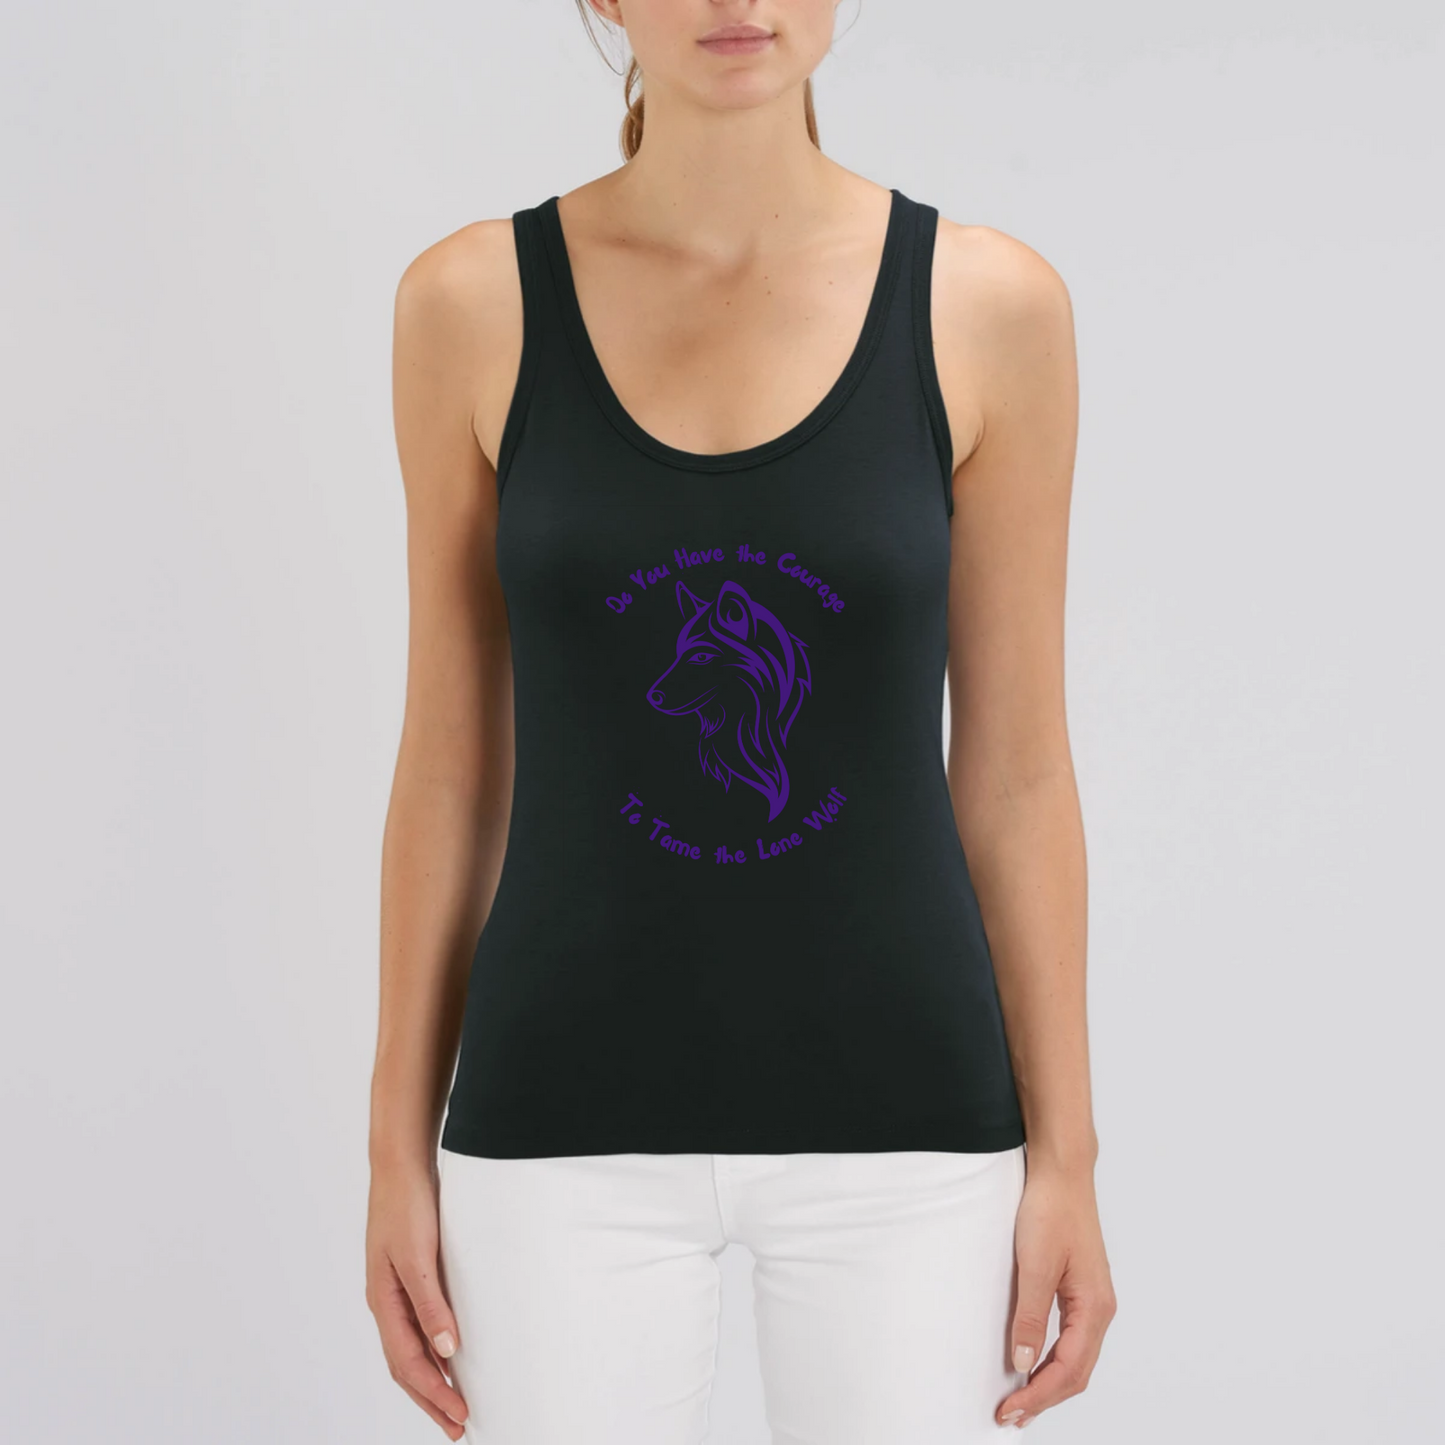 Model wearing a tank top with graphic design of a lone female wolf with wording Do you have the courage to tame the lone wolf. The tank top is black